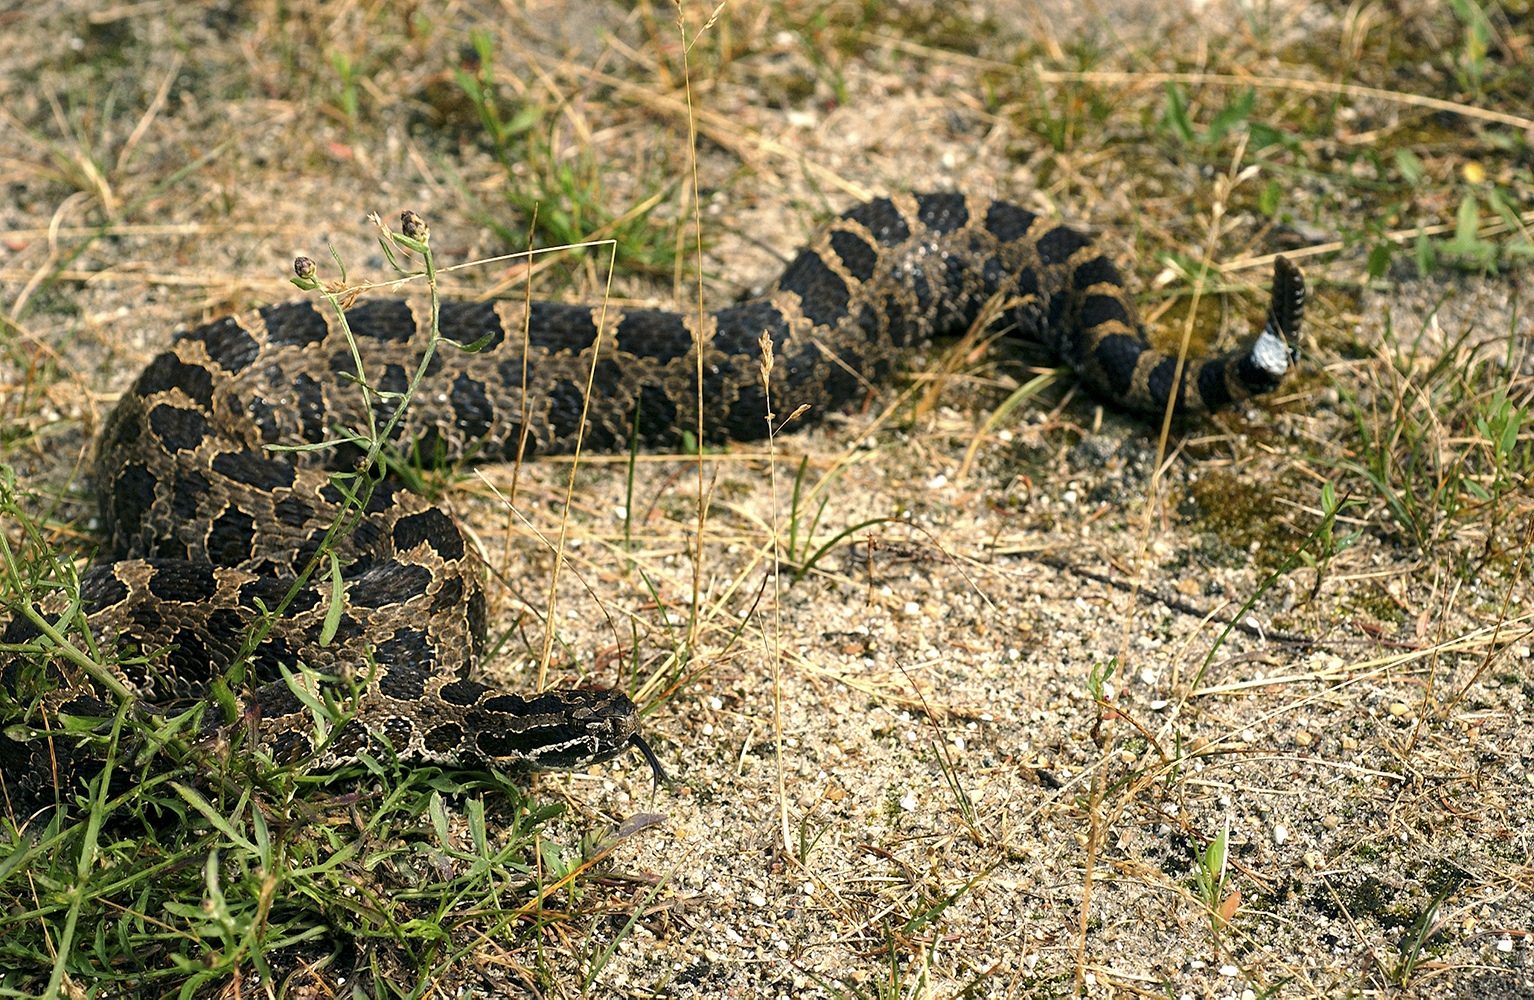 The massasauga rattlesnake is Michigan's only poisonous snake